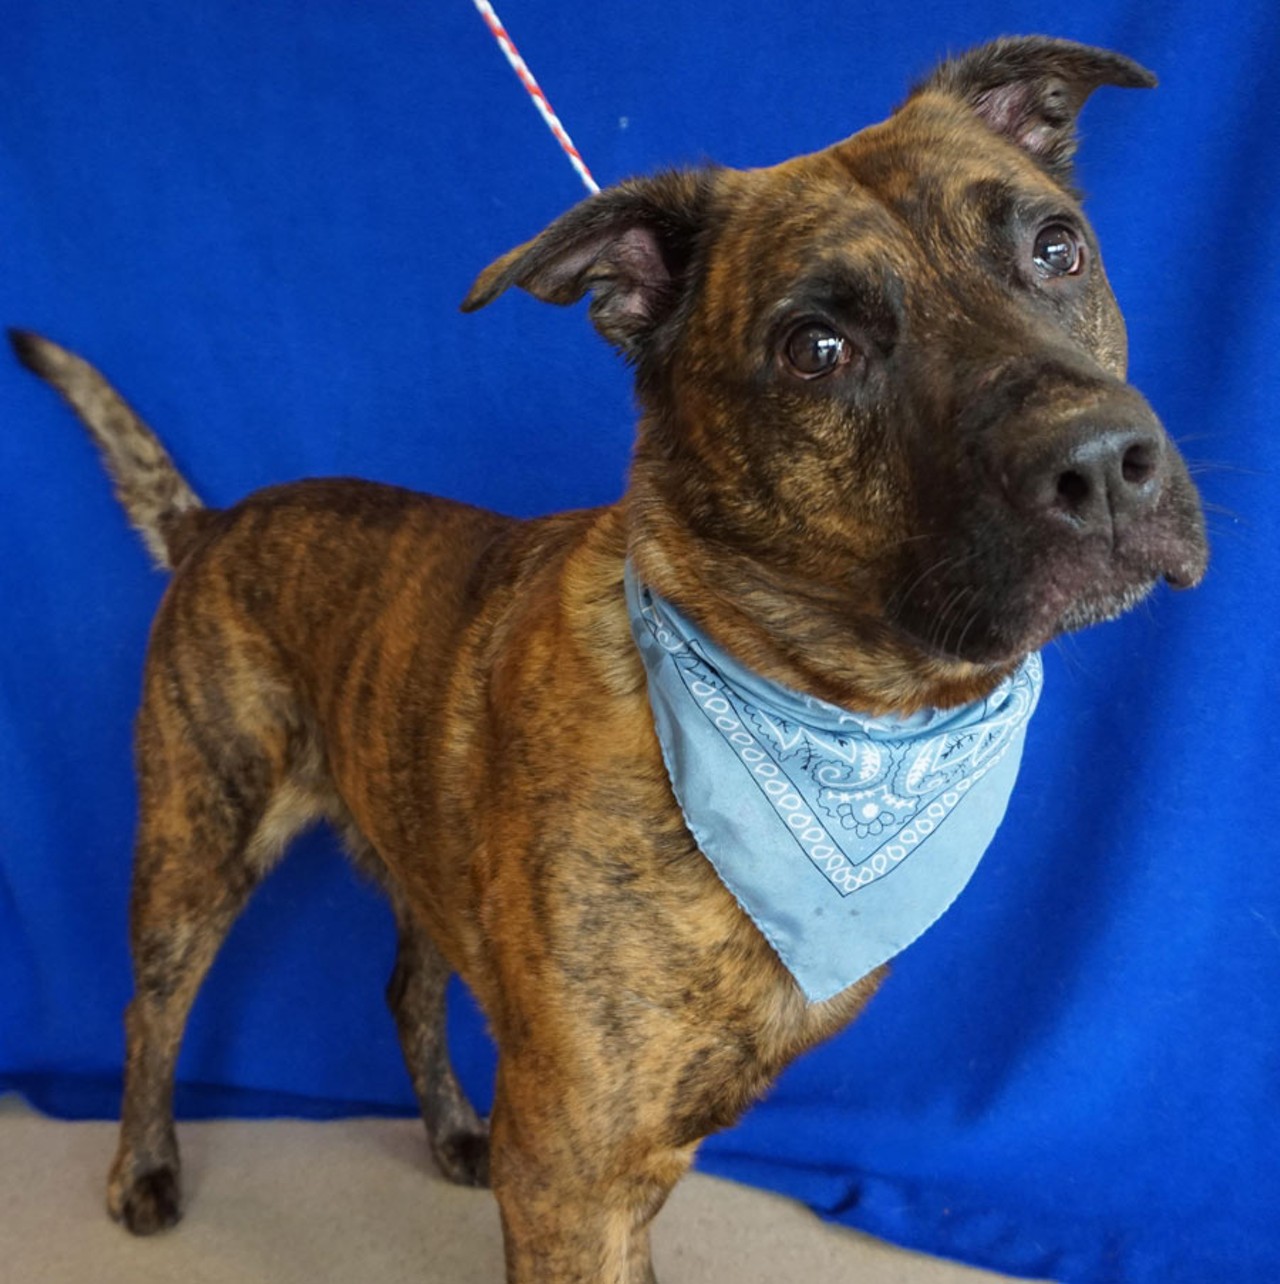 NAME: Buddy
GENDER: Male
BREED: Shepherd-Labrador mix
AGE: 6 years
WEIGHT: 60 pounds
SPECIAL CONSIDERATIONS: May prefer a home without children
REASON I CAME TO MHS: Agency transfer
LOCATION: Rochester Hills Center for Animal Care
ID NUMBER: 865838